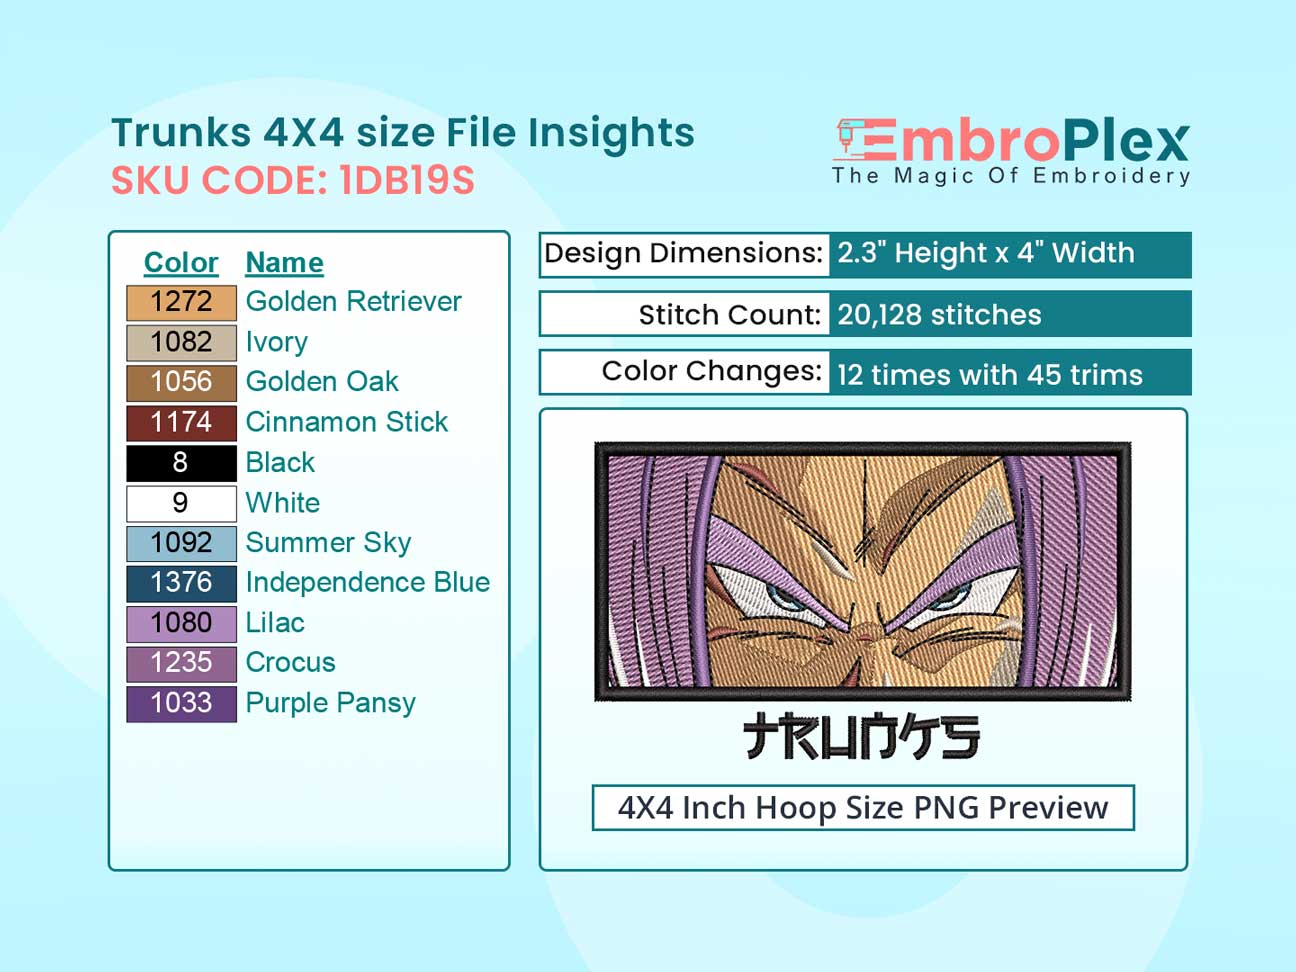 Anime-Inspired Trunks Embroidery Design File - 4x4 Inch hoop Size Variation overview image